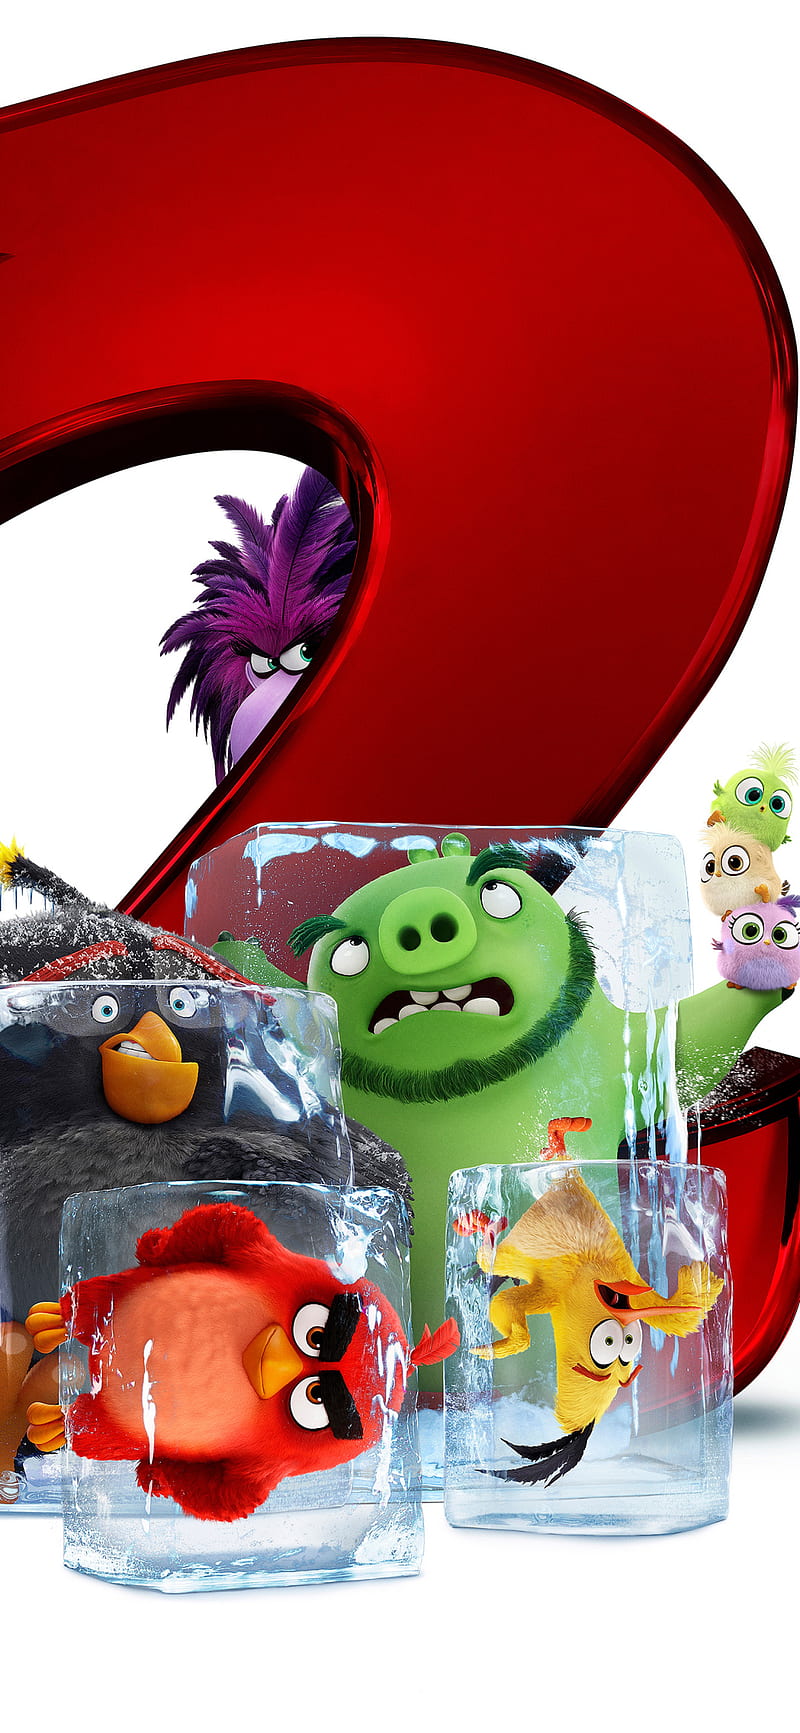 Wallpaper Angry Birds 3d Image Num 98